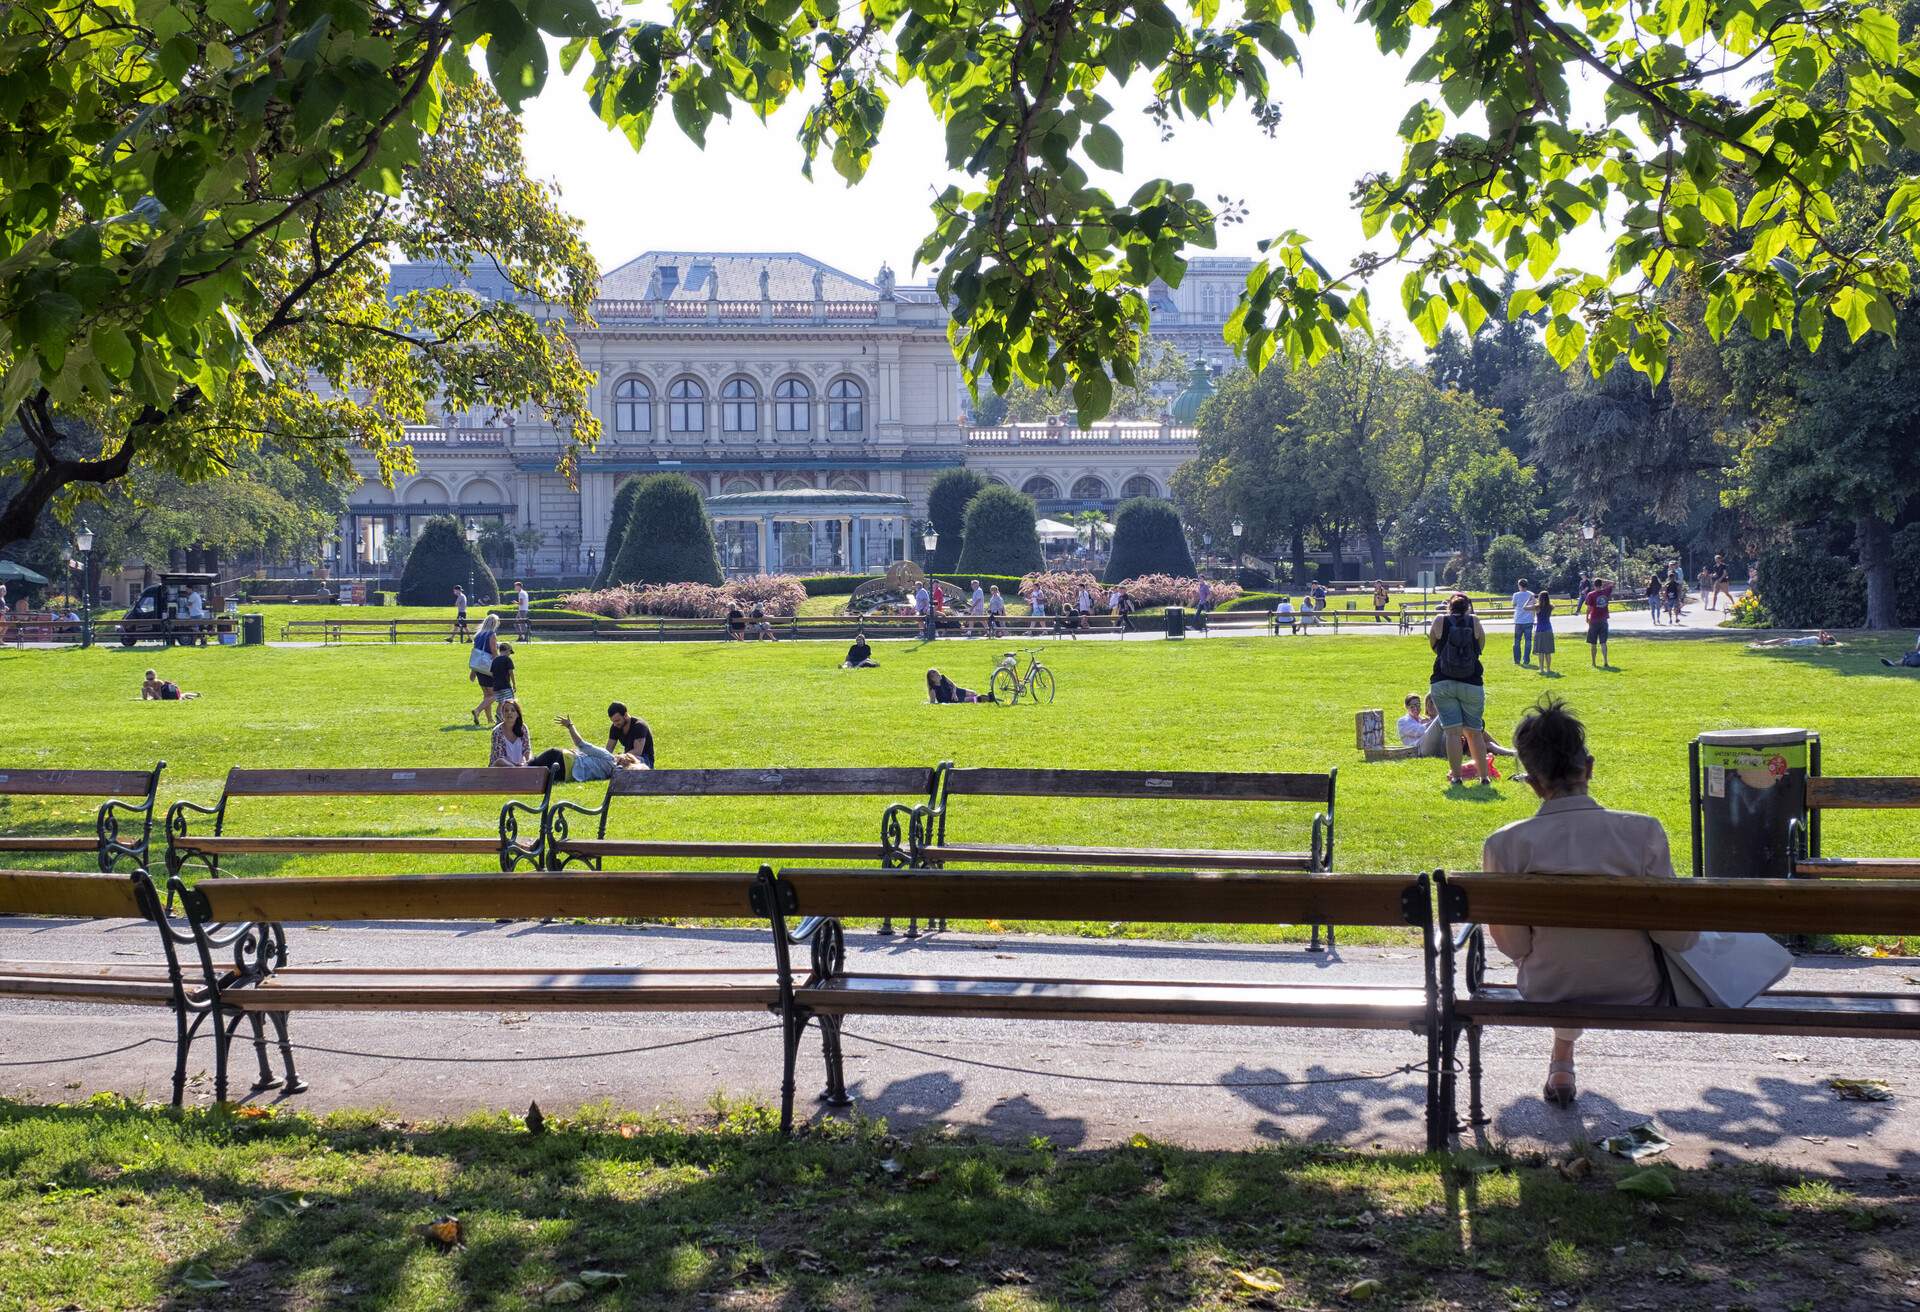 stadtpark is situated along the ring road in vienna and is built in the 19th century.it covers a relatively large area near the town center and offer a relaxing atmosphere.